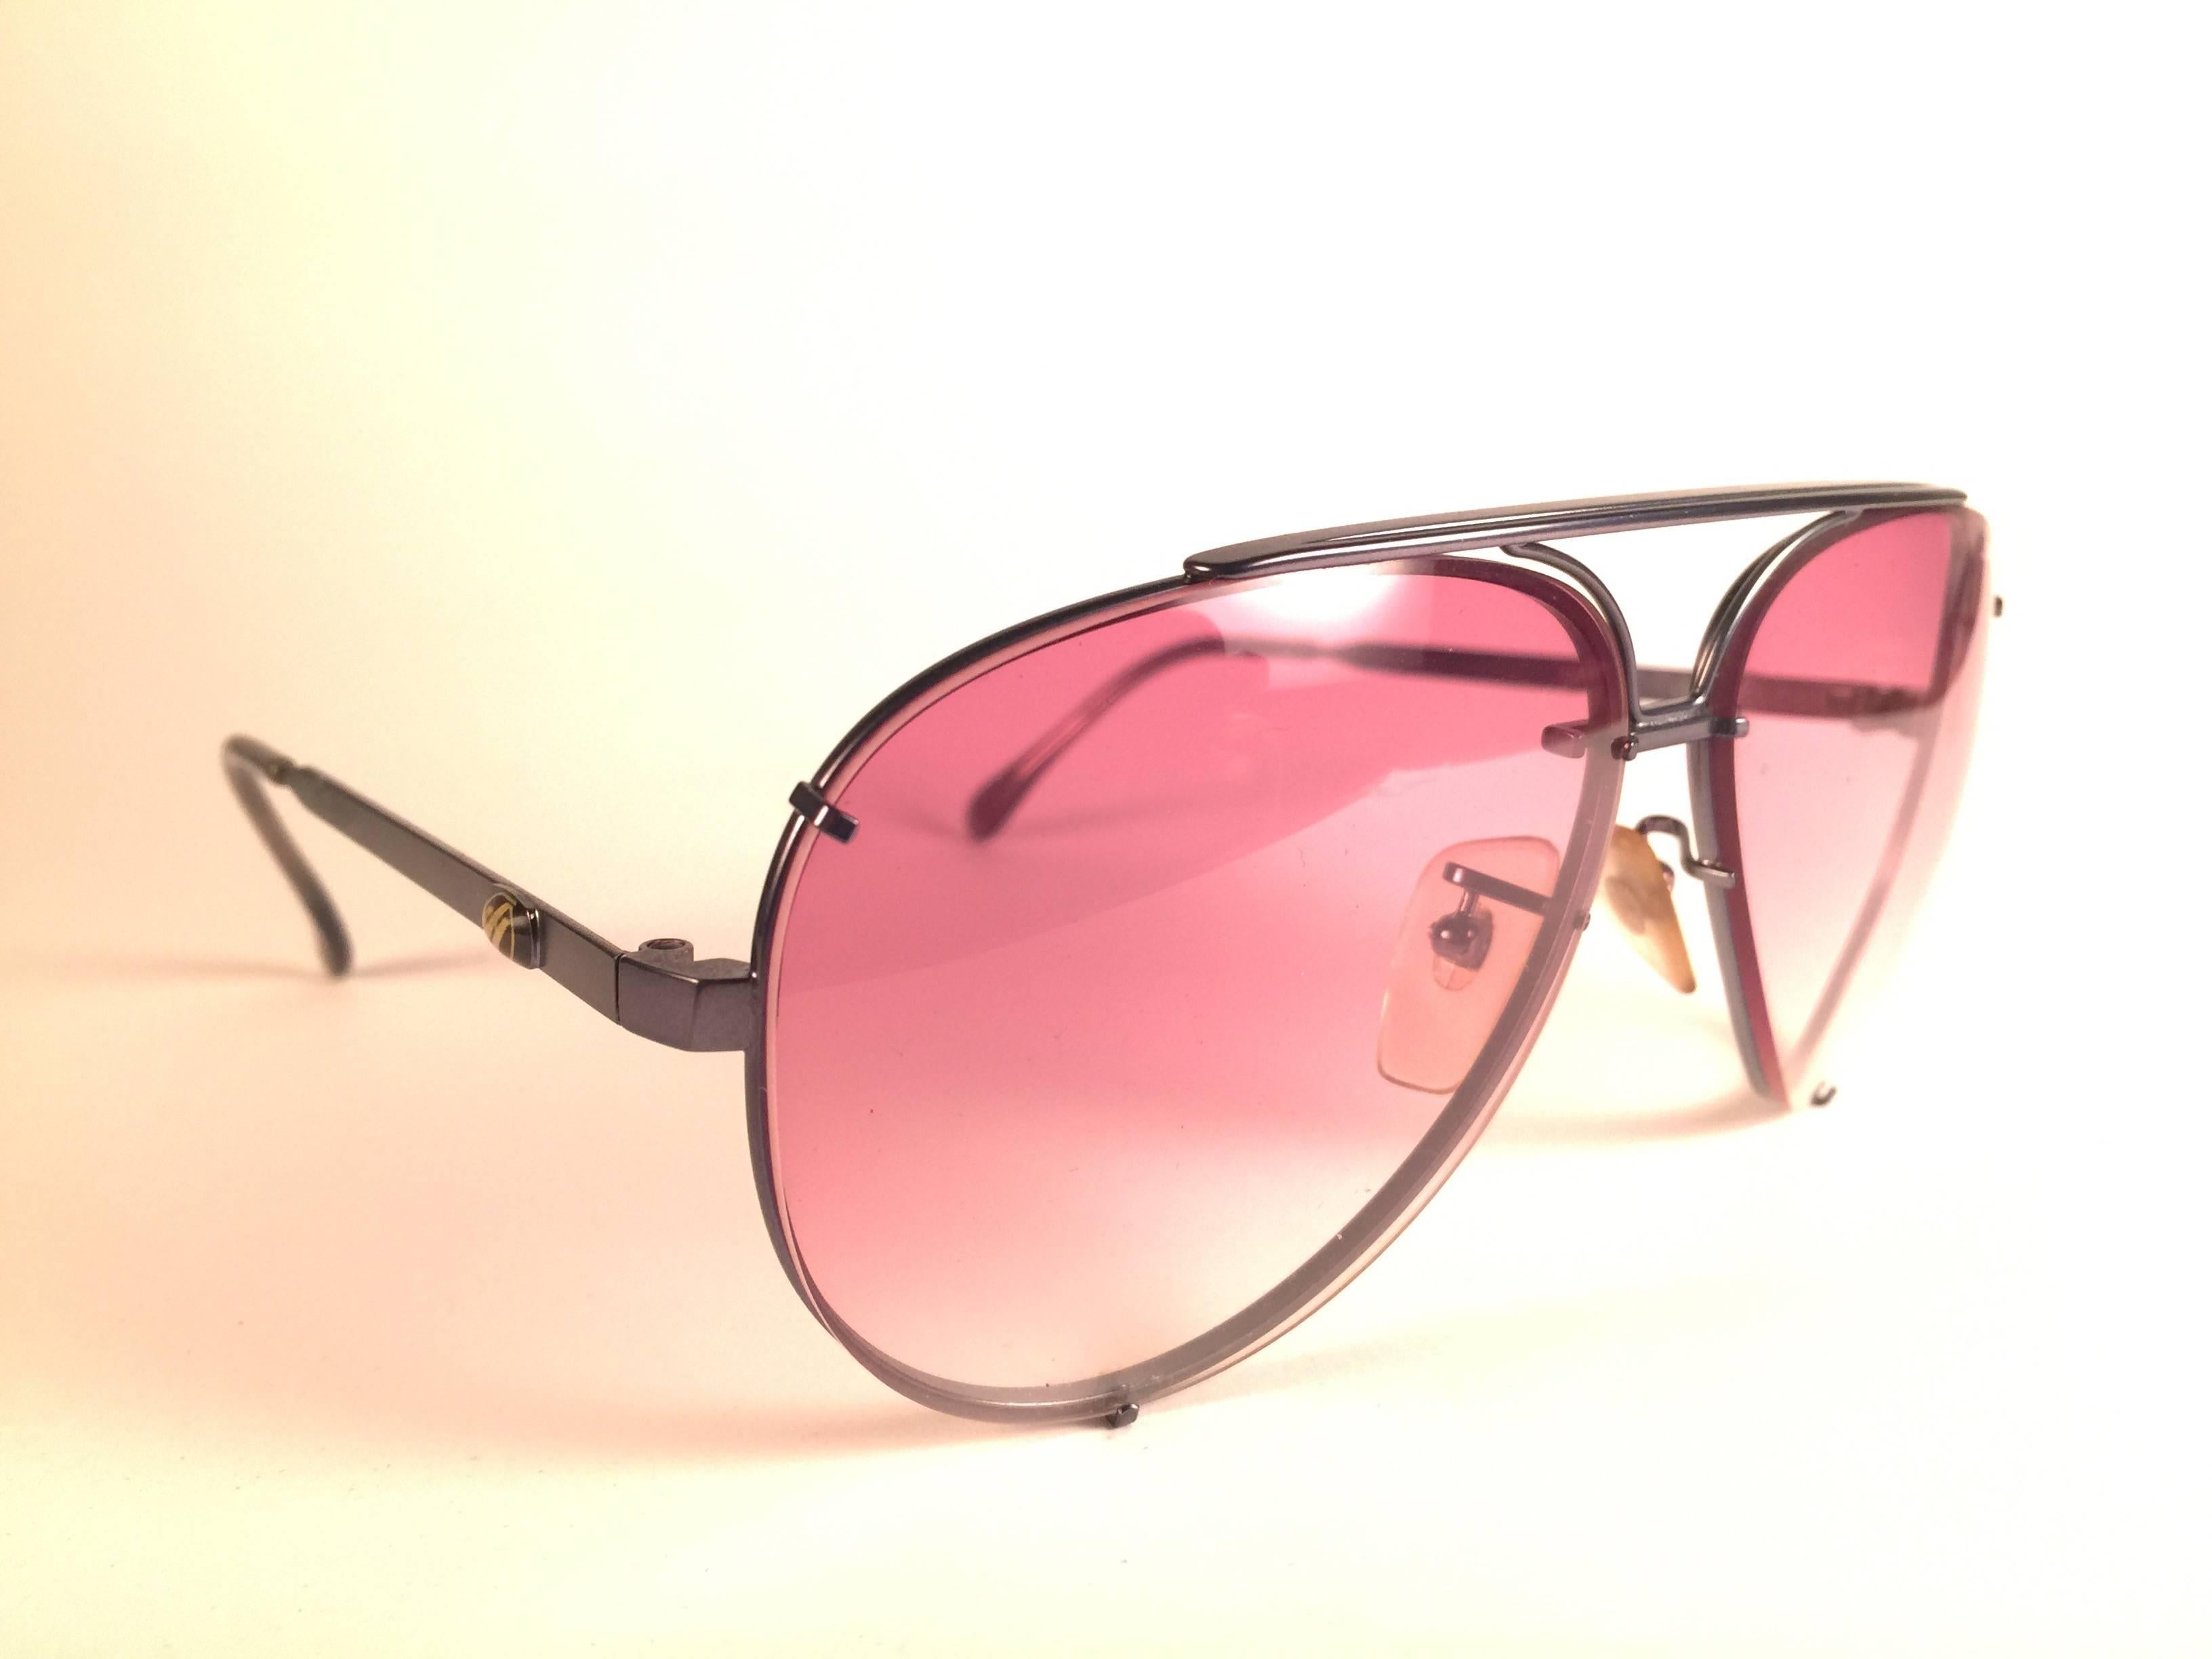 New Vintage Julio Iglesias Design sunglasses gun metal frame holding  pair pf rose gradient lenses. This pair may show minor sign of wear due to nearly 40 years of storage.

Made in France.